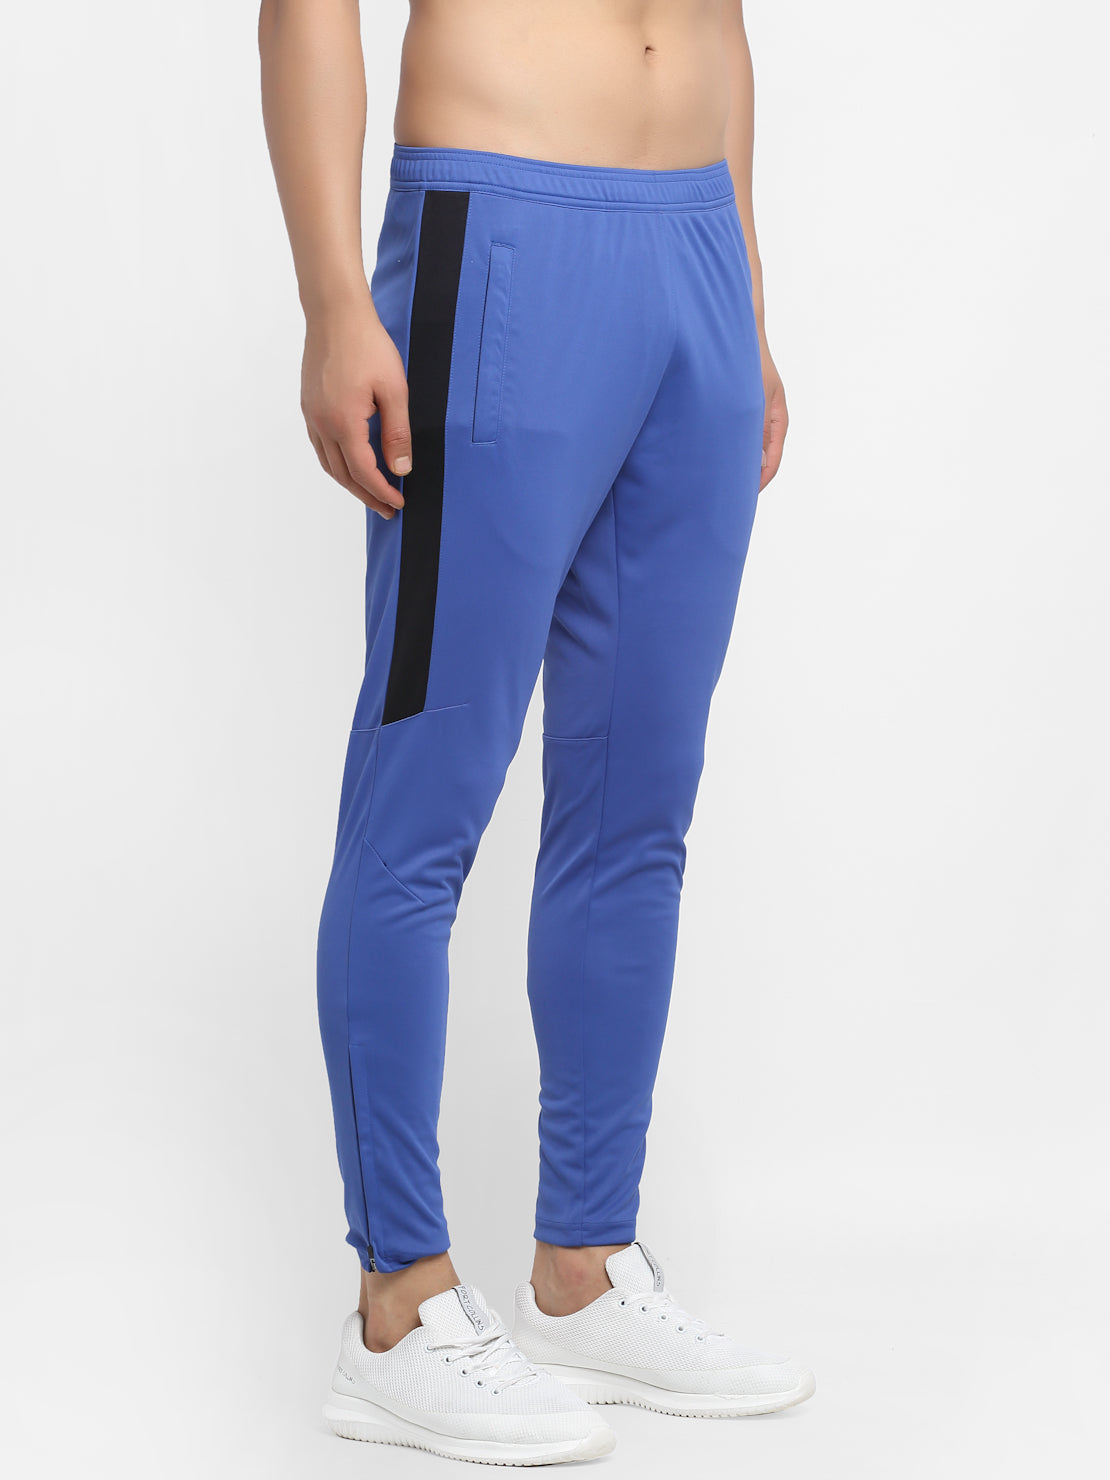 Unisex FLEECE 8 POCKET BAGGY TRACK PANT FOR MEN, Solid at Rs 899/piece in  Mumbai